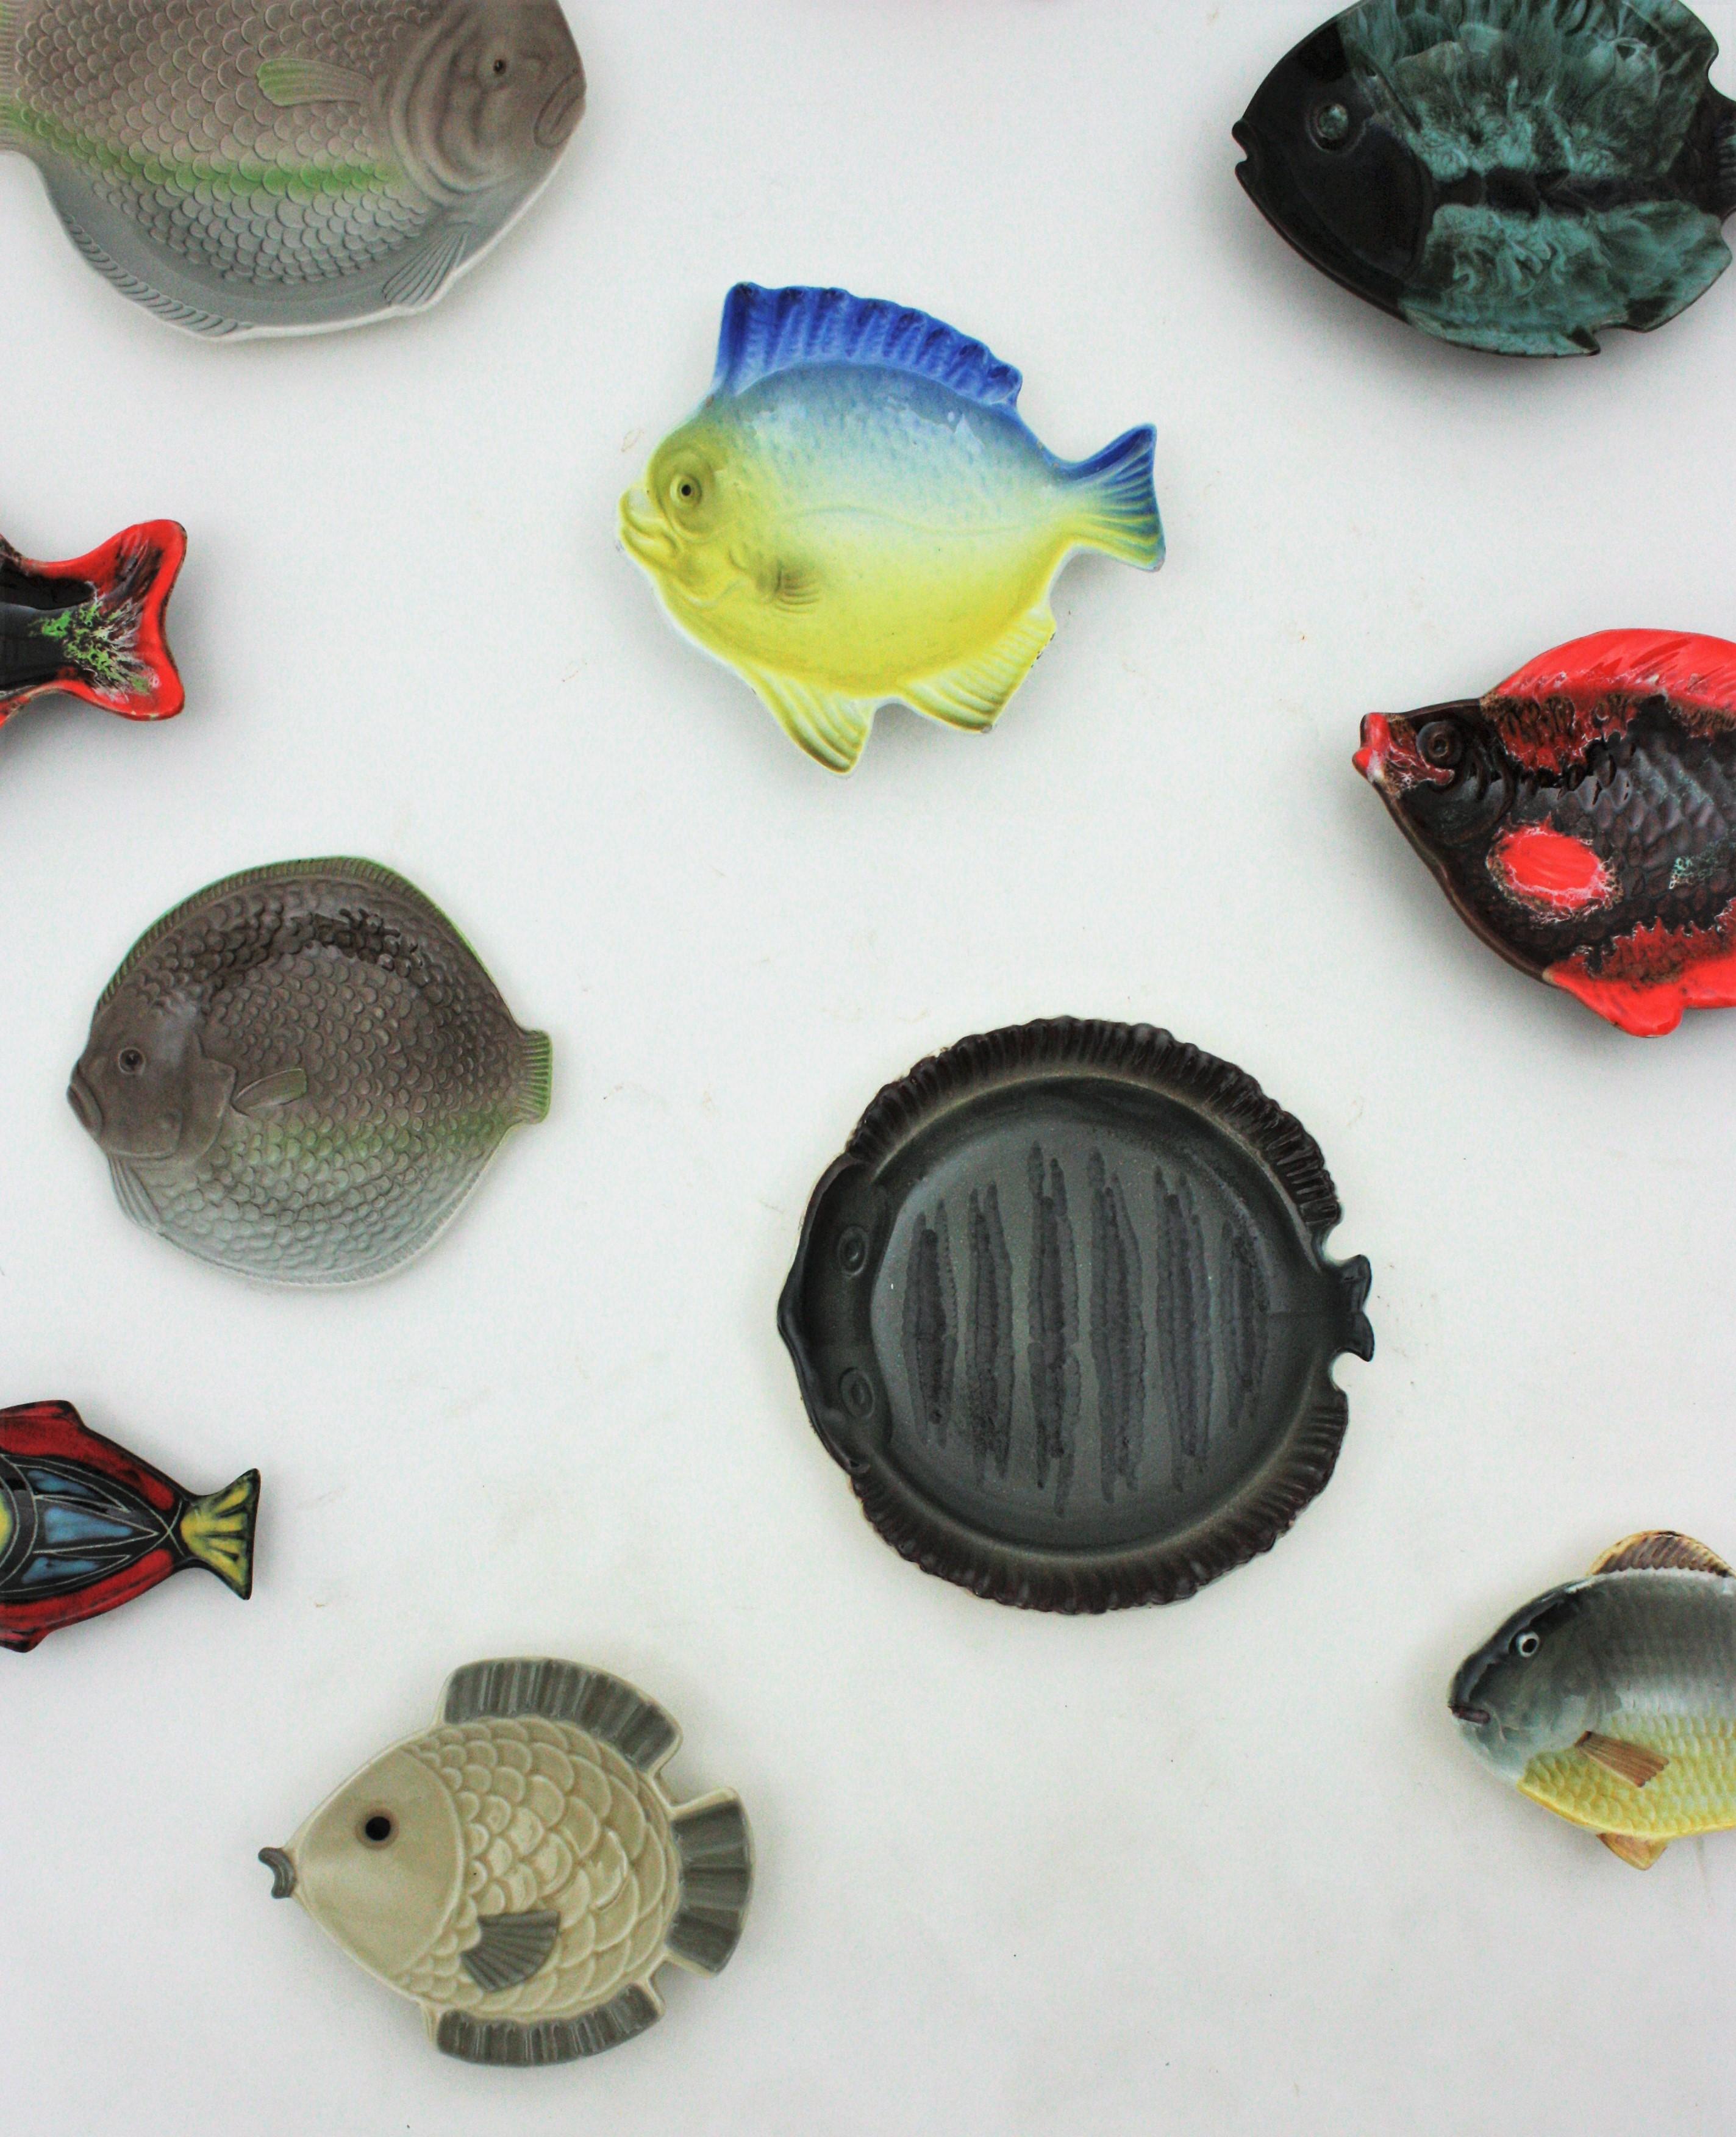 European Wall Art Composition of Mid-Century Modern Ceramic Fish Shaped Plates For Sale